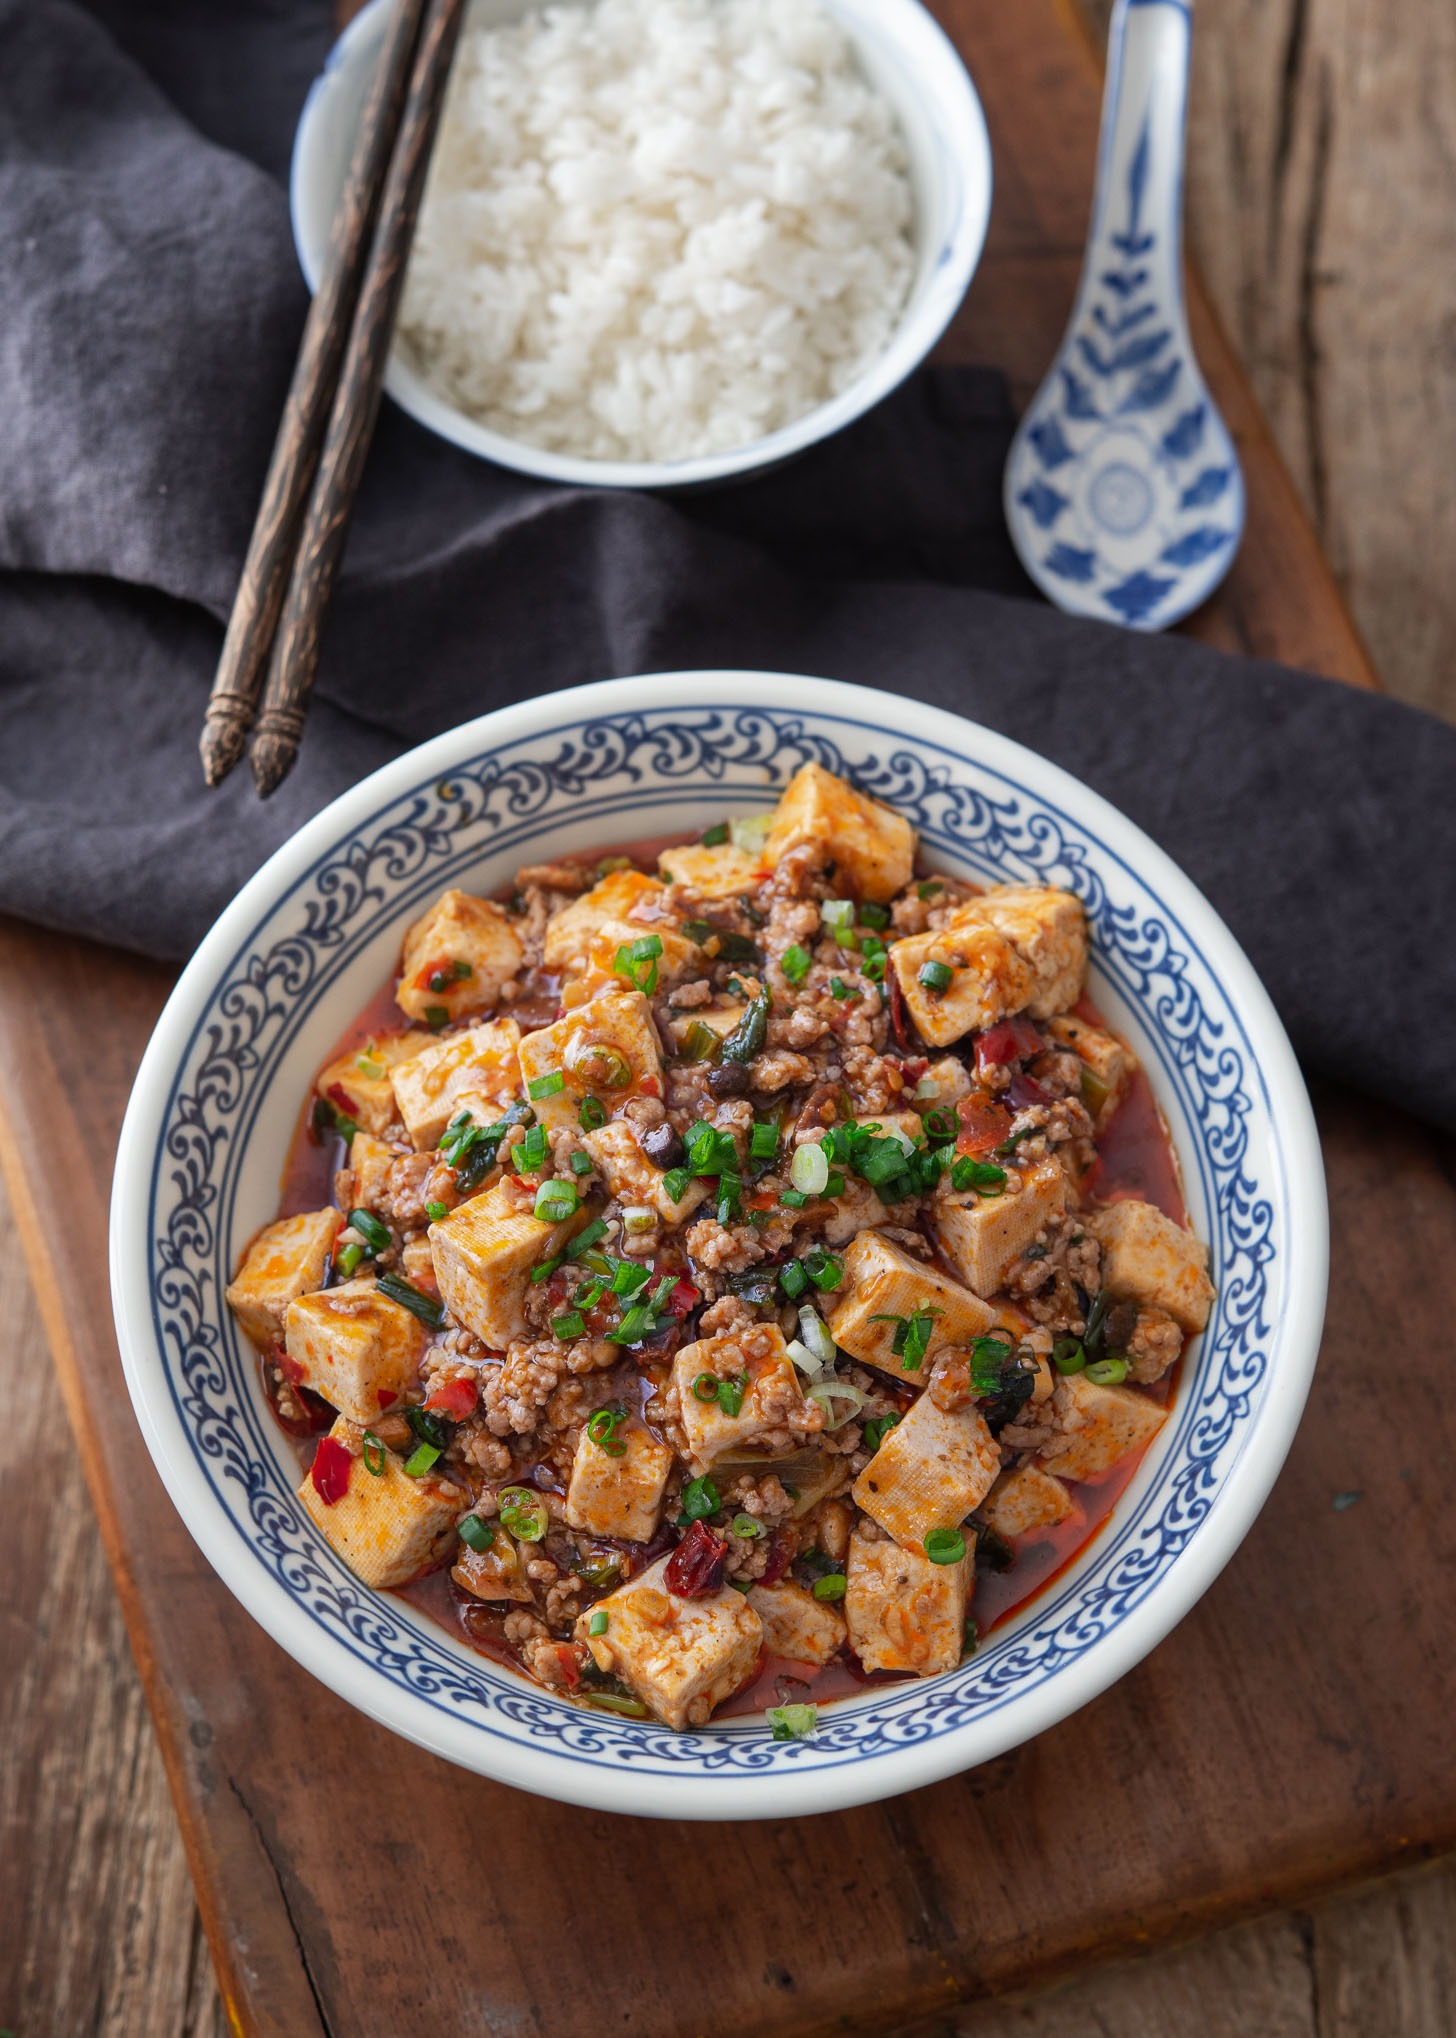 A top view of a bowl of mapo tofu and rice.